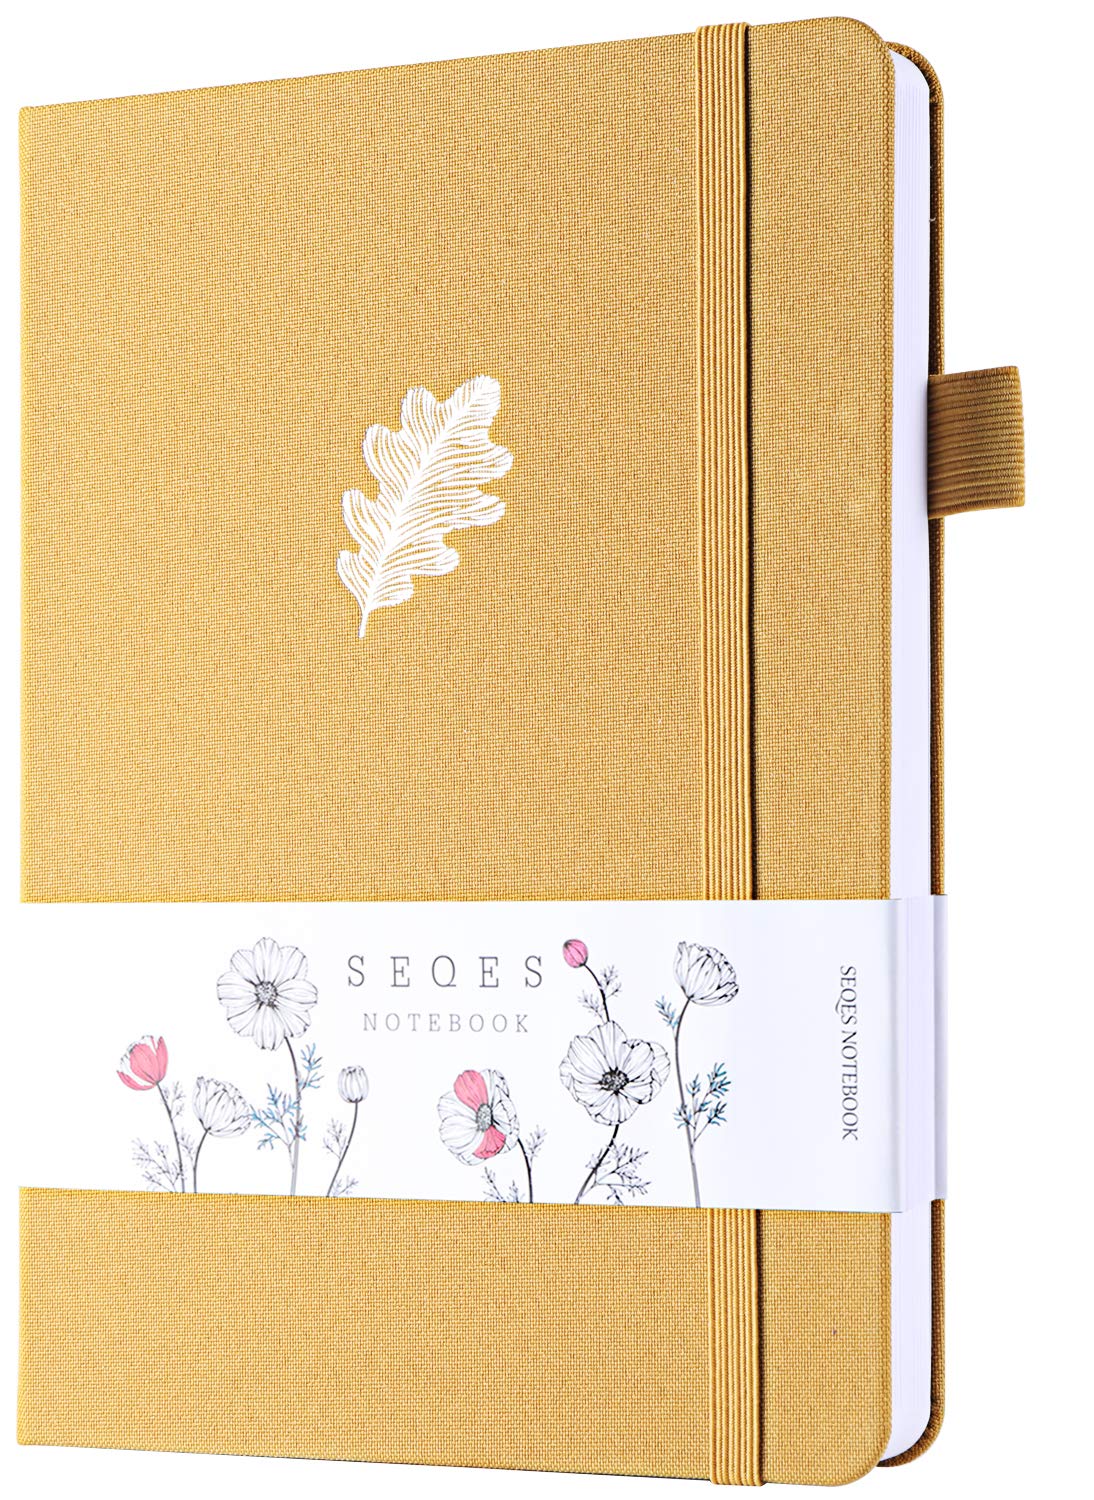 SeQeS Bullet Dotted Journal - A5 Dot Grid Notebook with pages